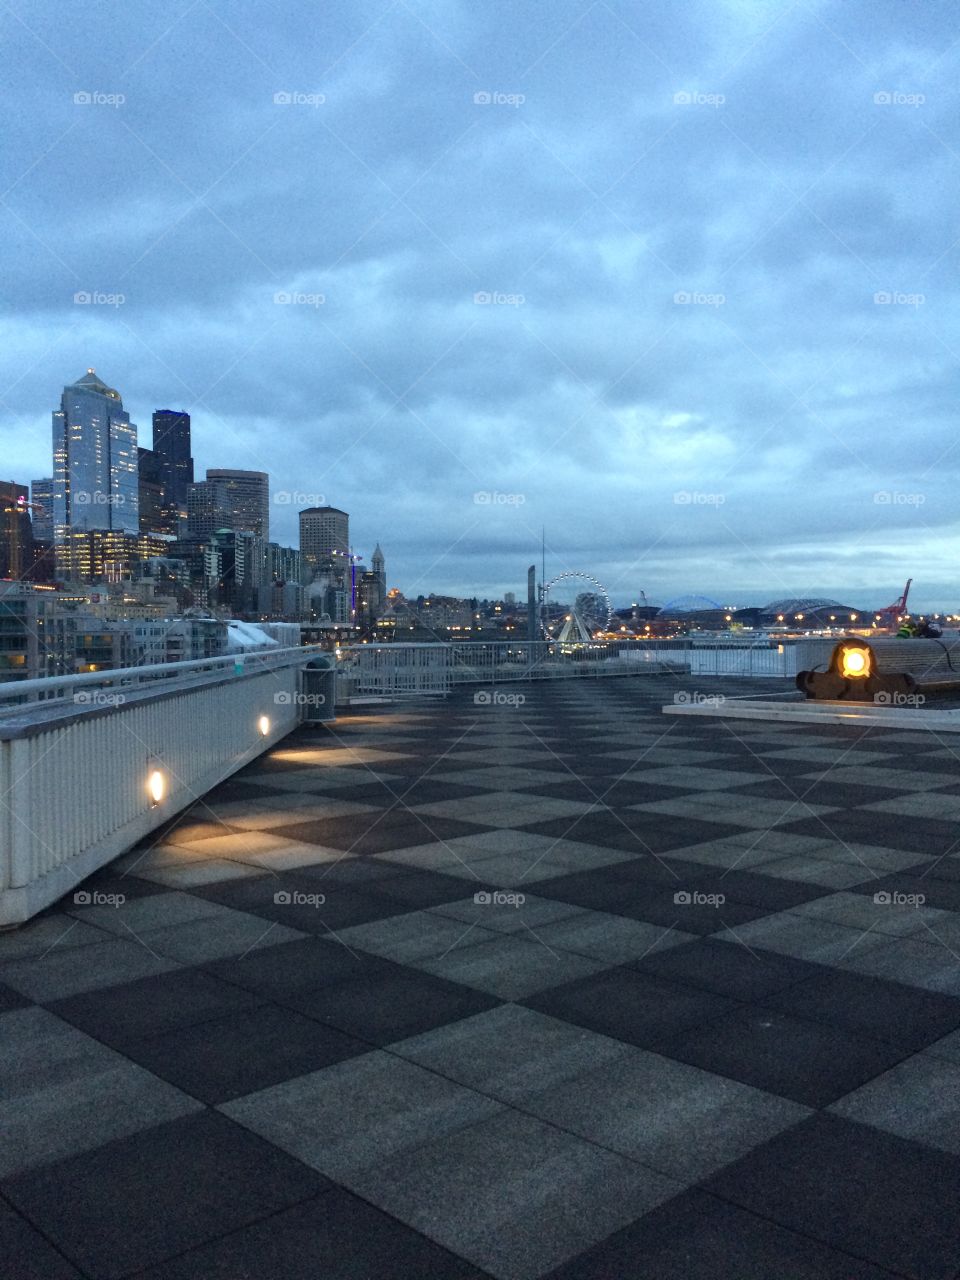 Seattle in the evening 